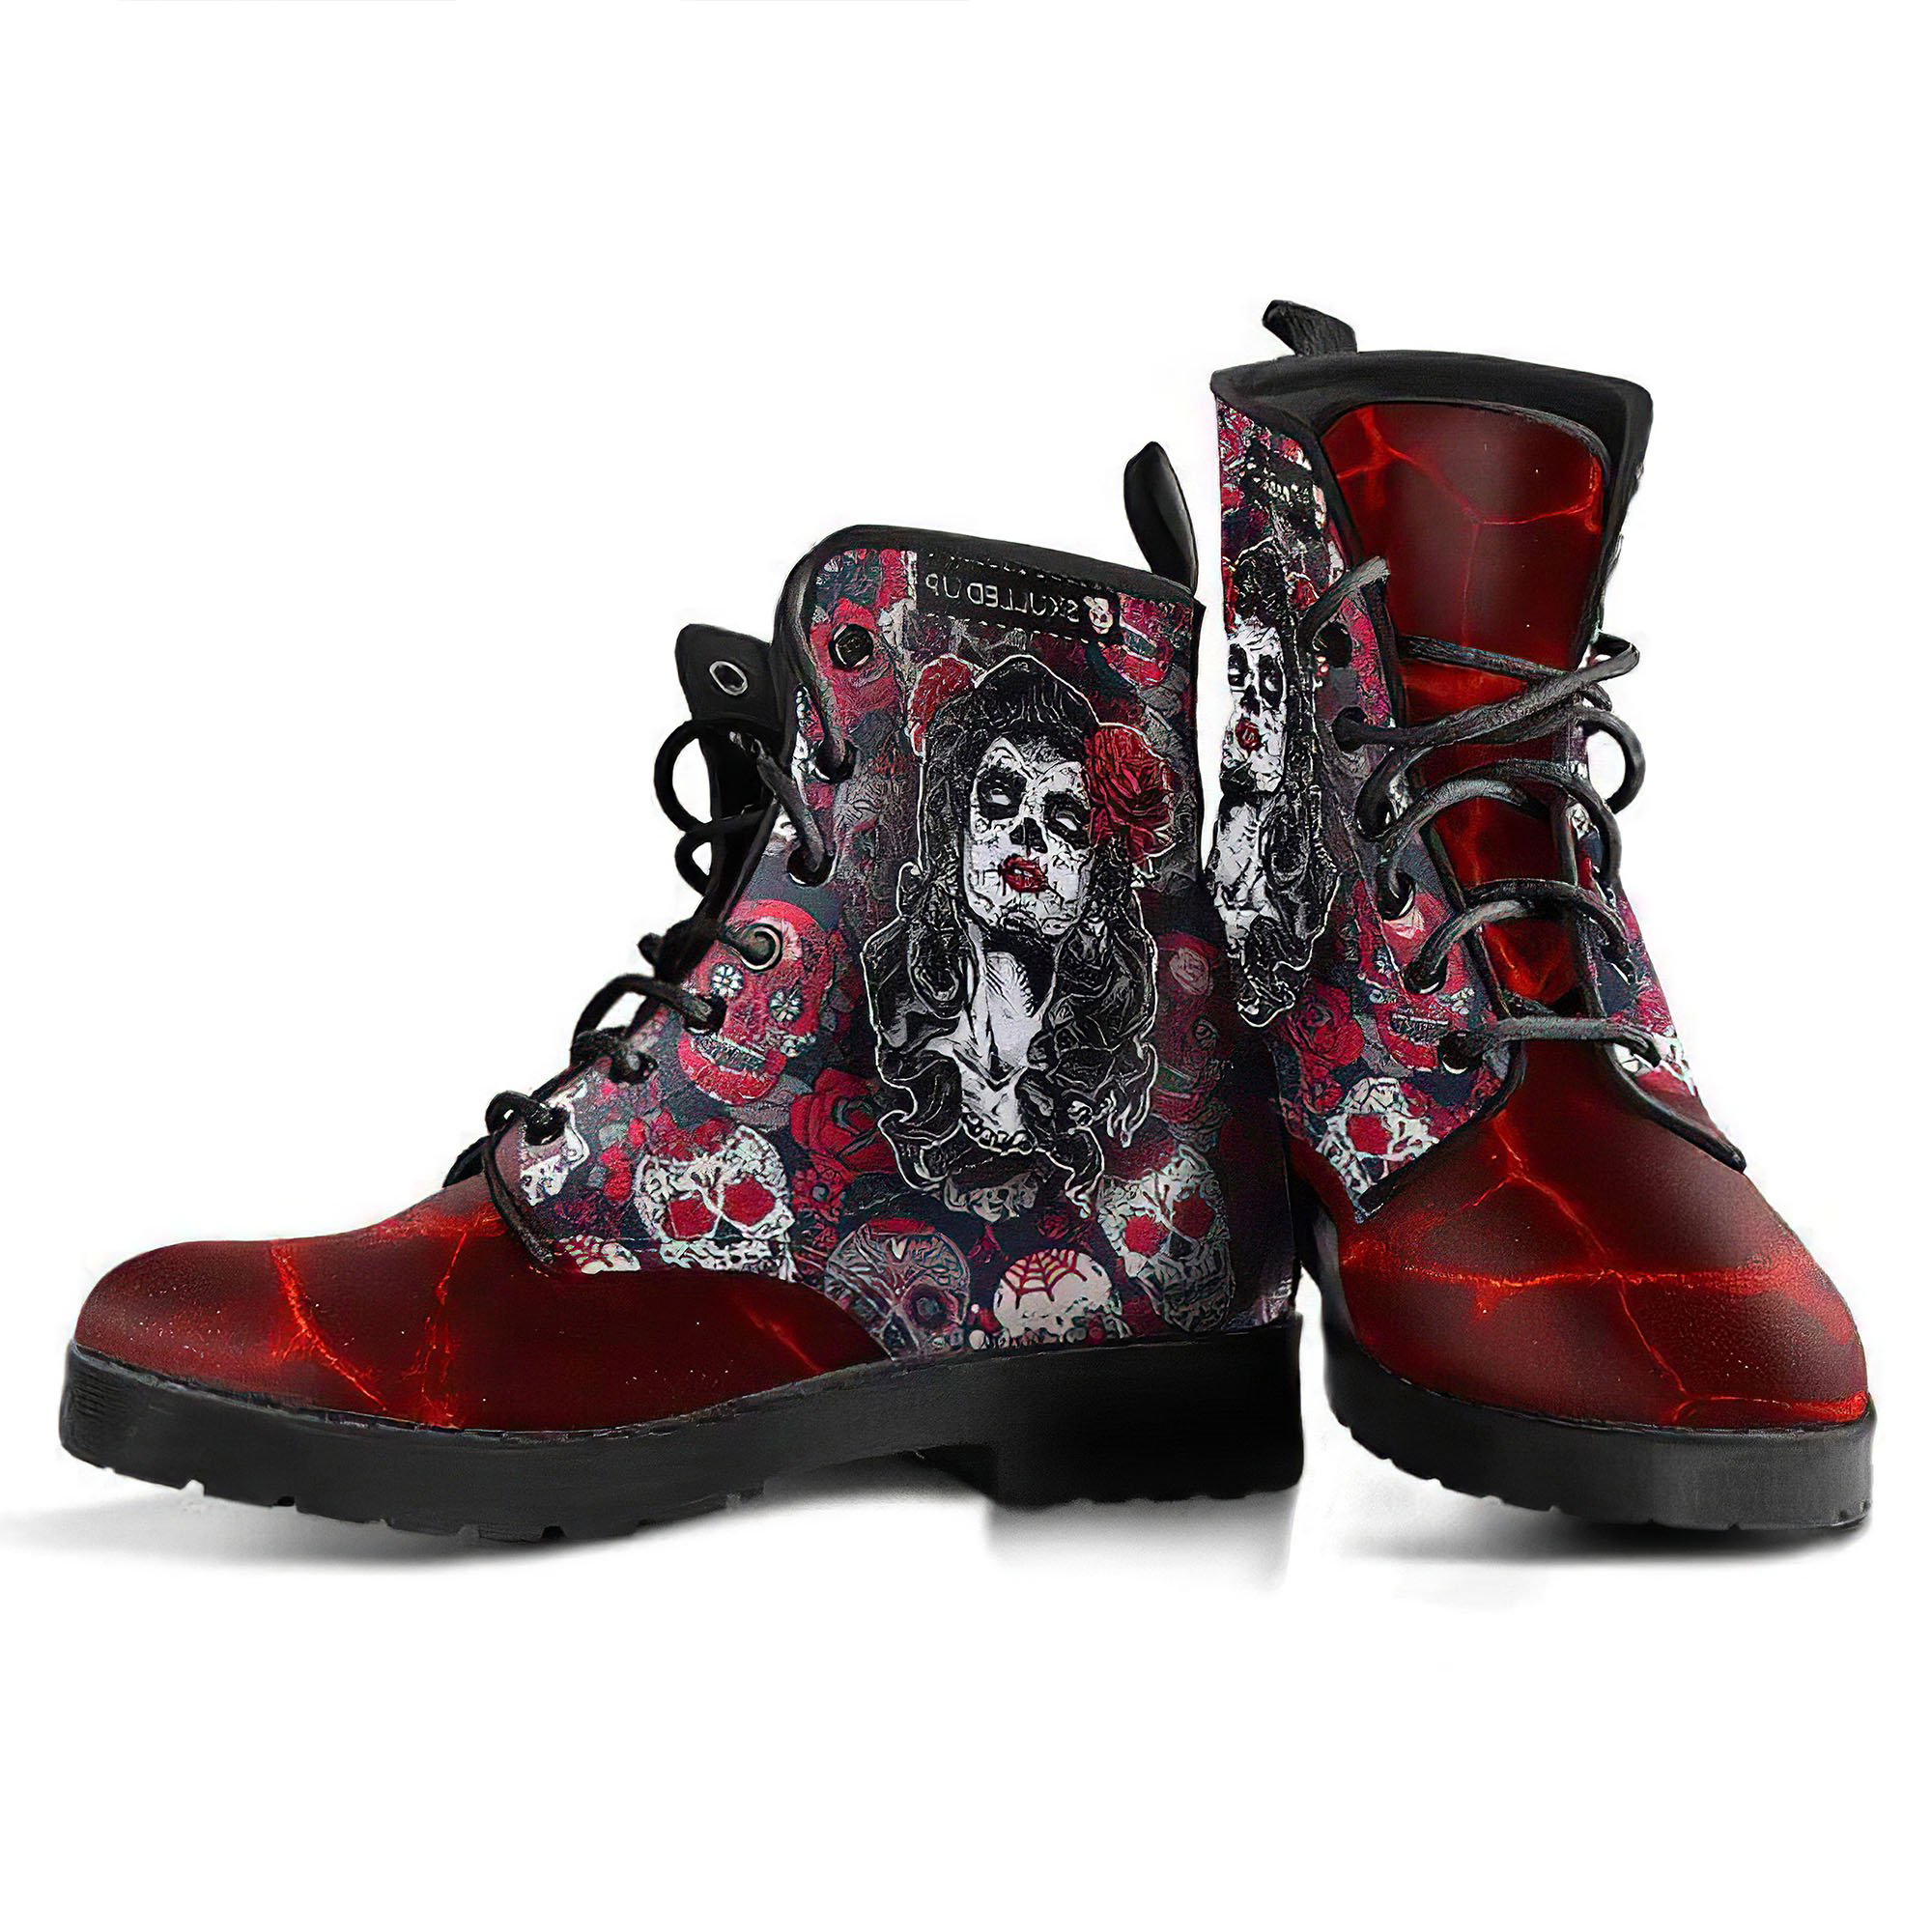 day-of-the-dead-boots-womens-leather-boots-gp-main.jpg